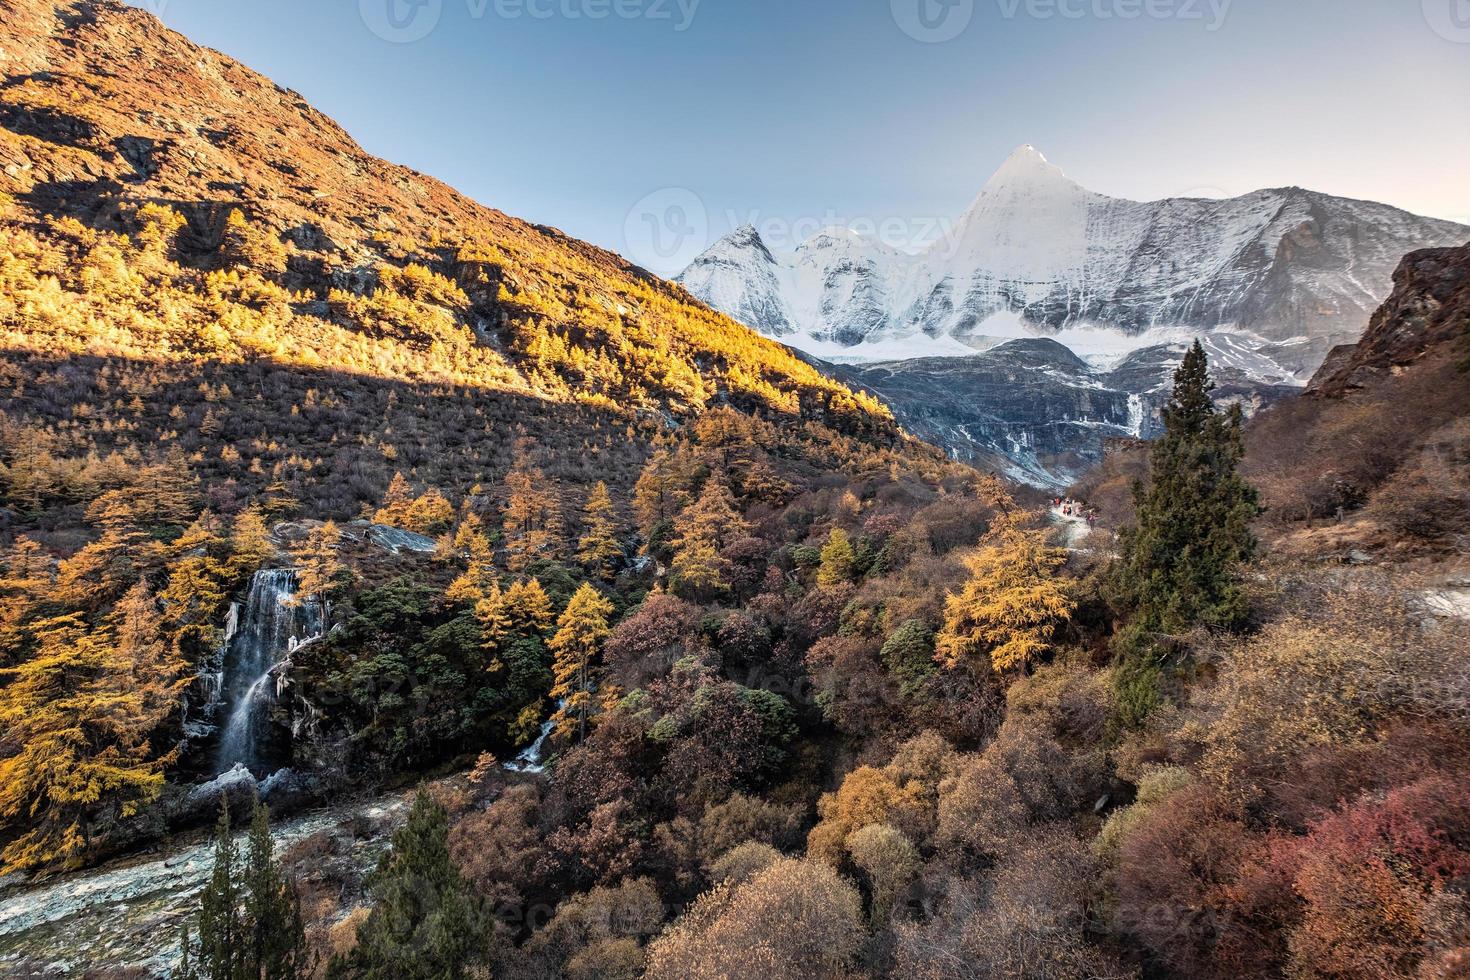 Mount Yangmaiyong with waterfall in autumn forest at evening. Yading nature reserve photo